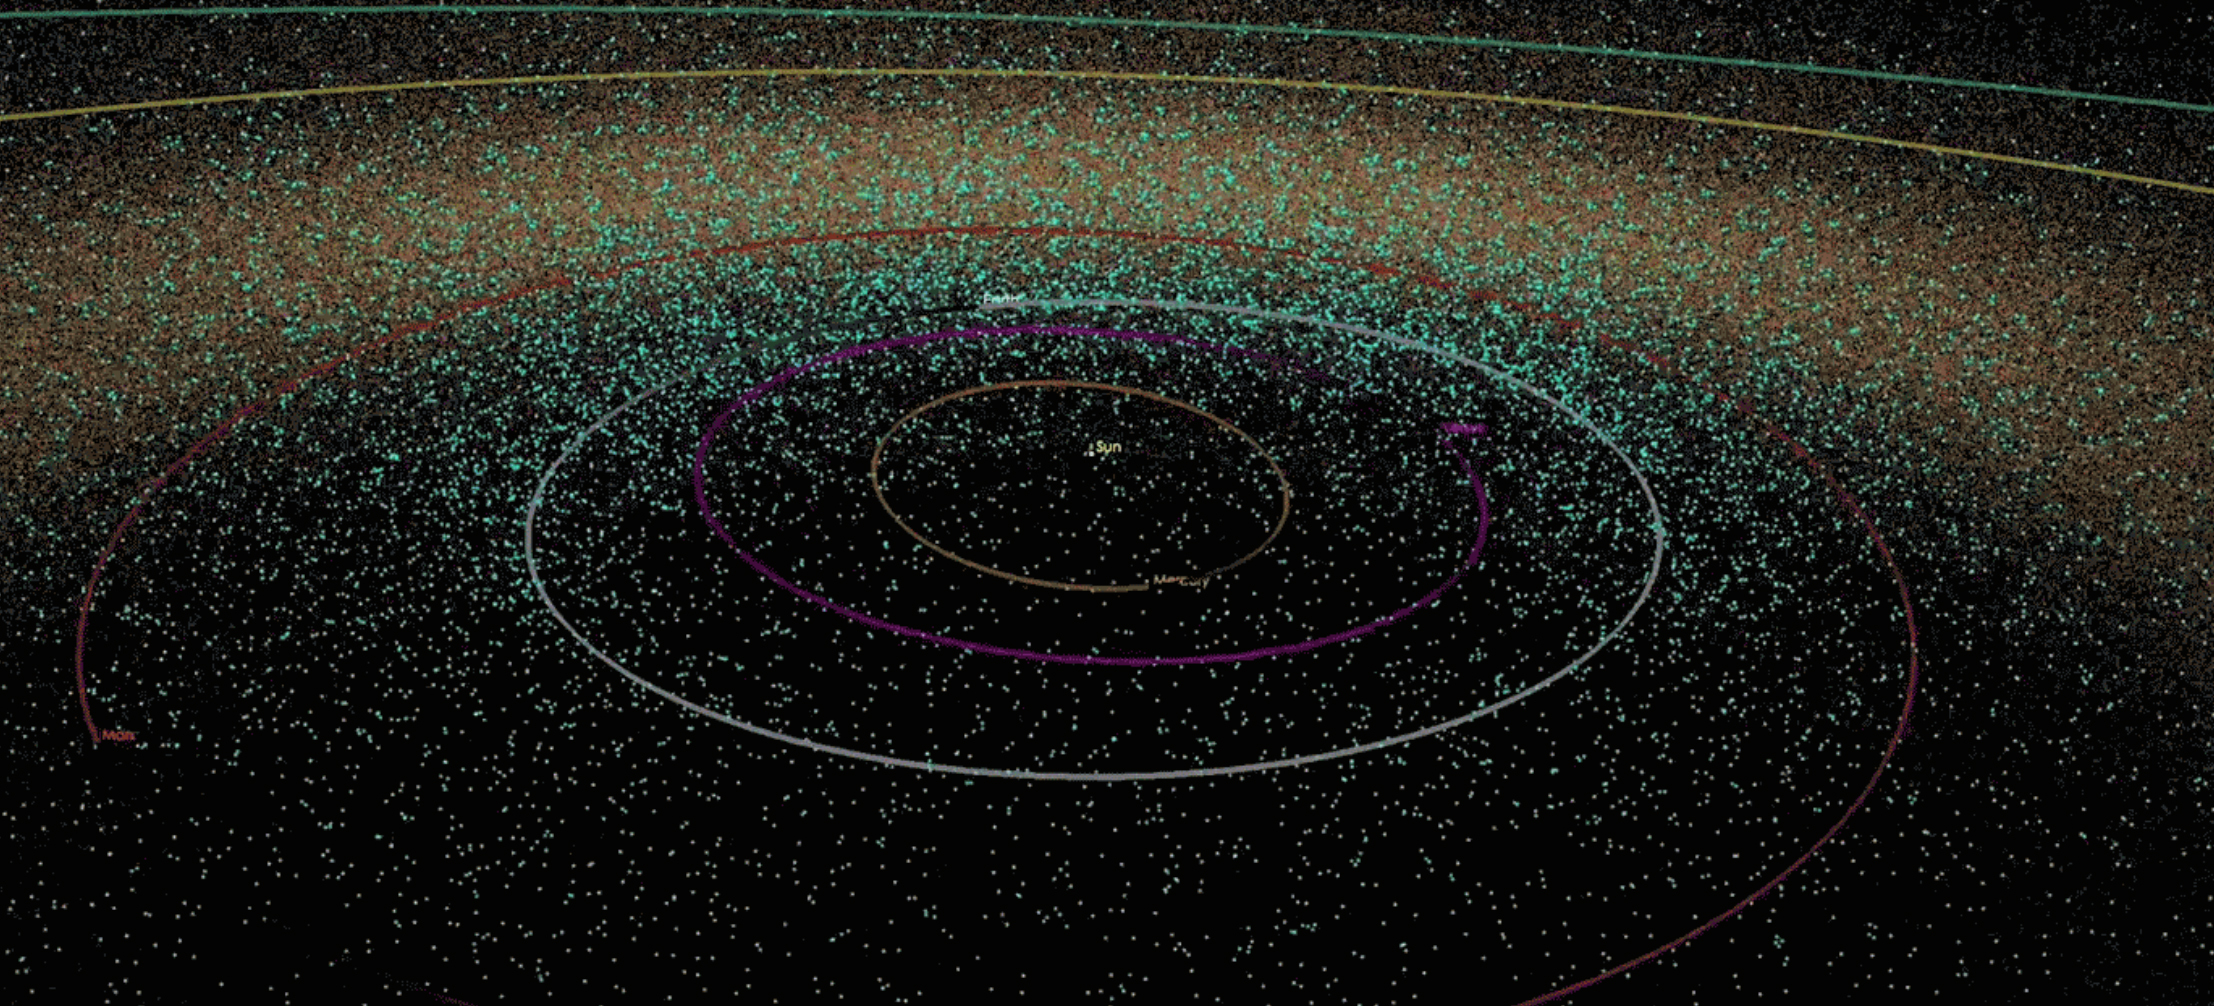 PHOTO: The animation depicts a mapping of the positions of known near-Earth objects (NEOs) at points in time over the past 20 years, and finishes with a map of all known asteroids as of January 2018.